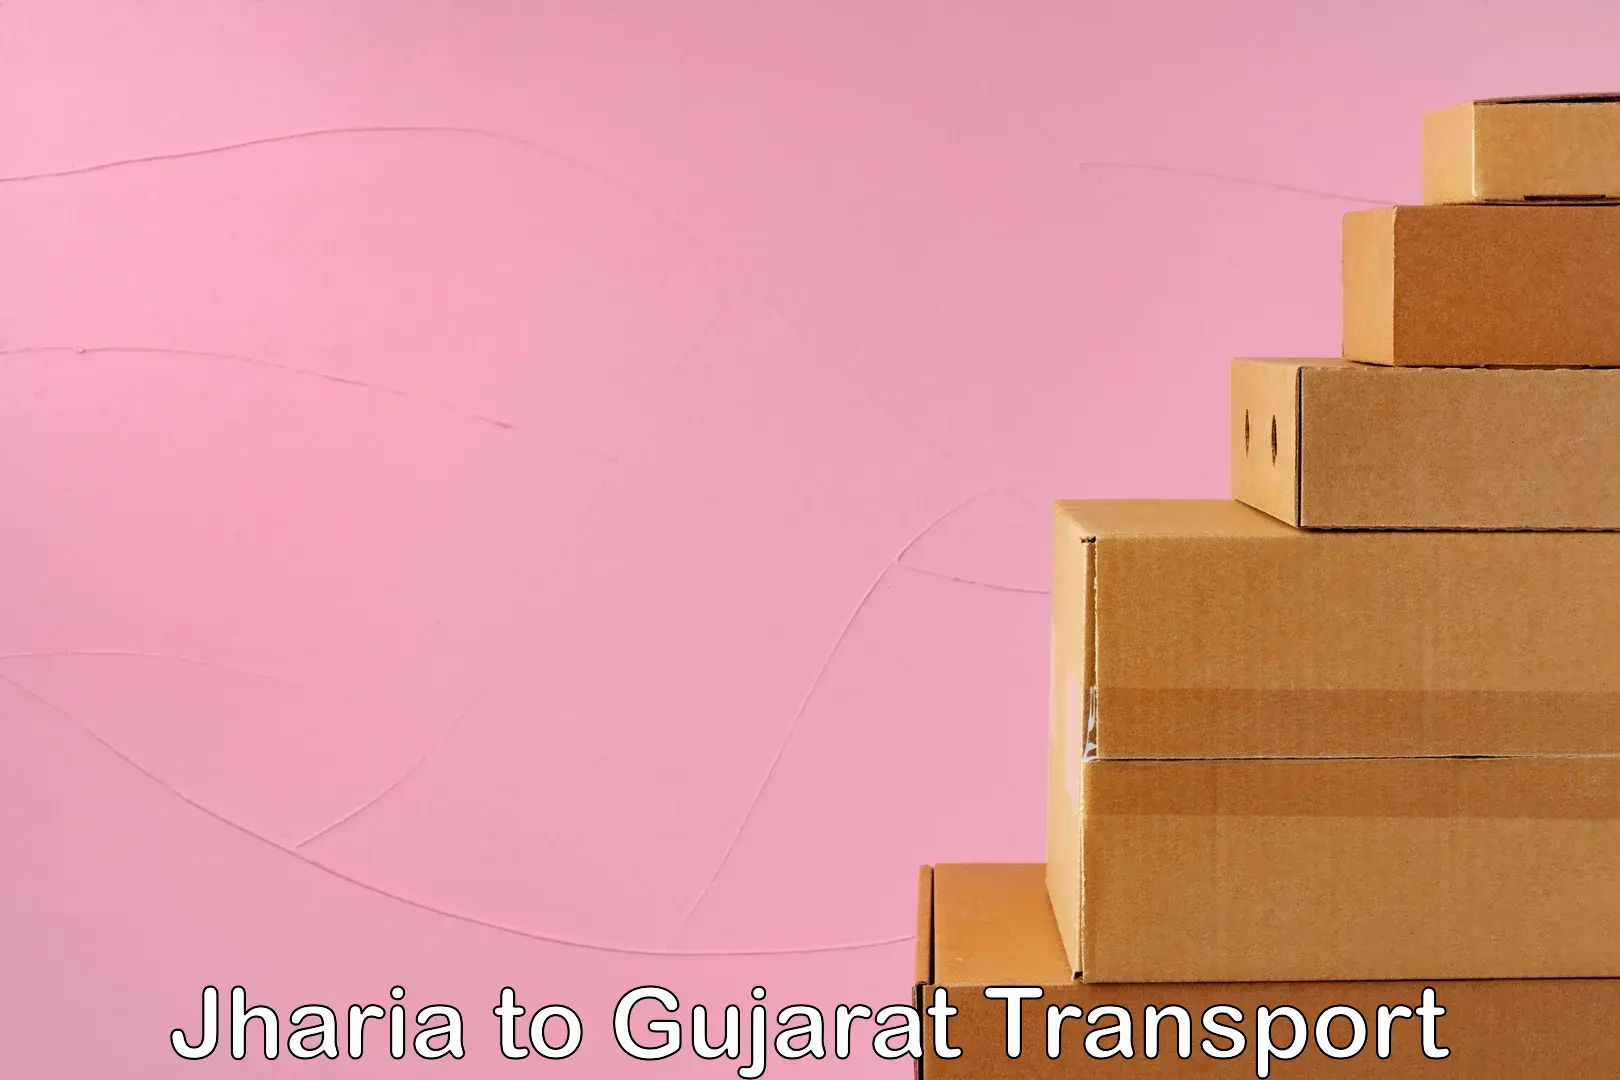 Express transport services Jharia to Dharampur Valsad